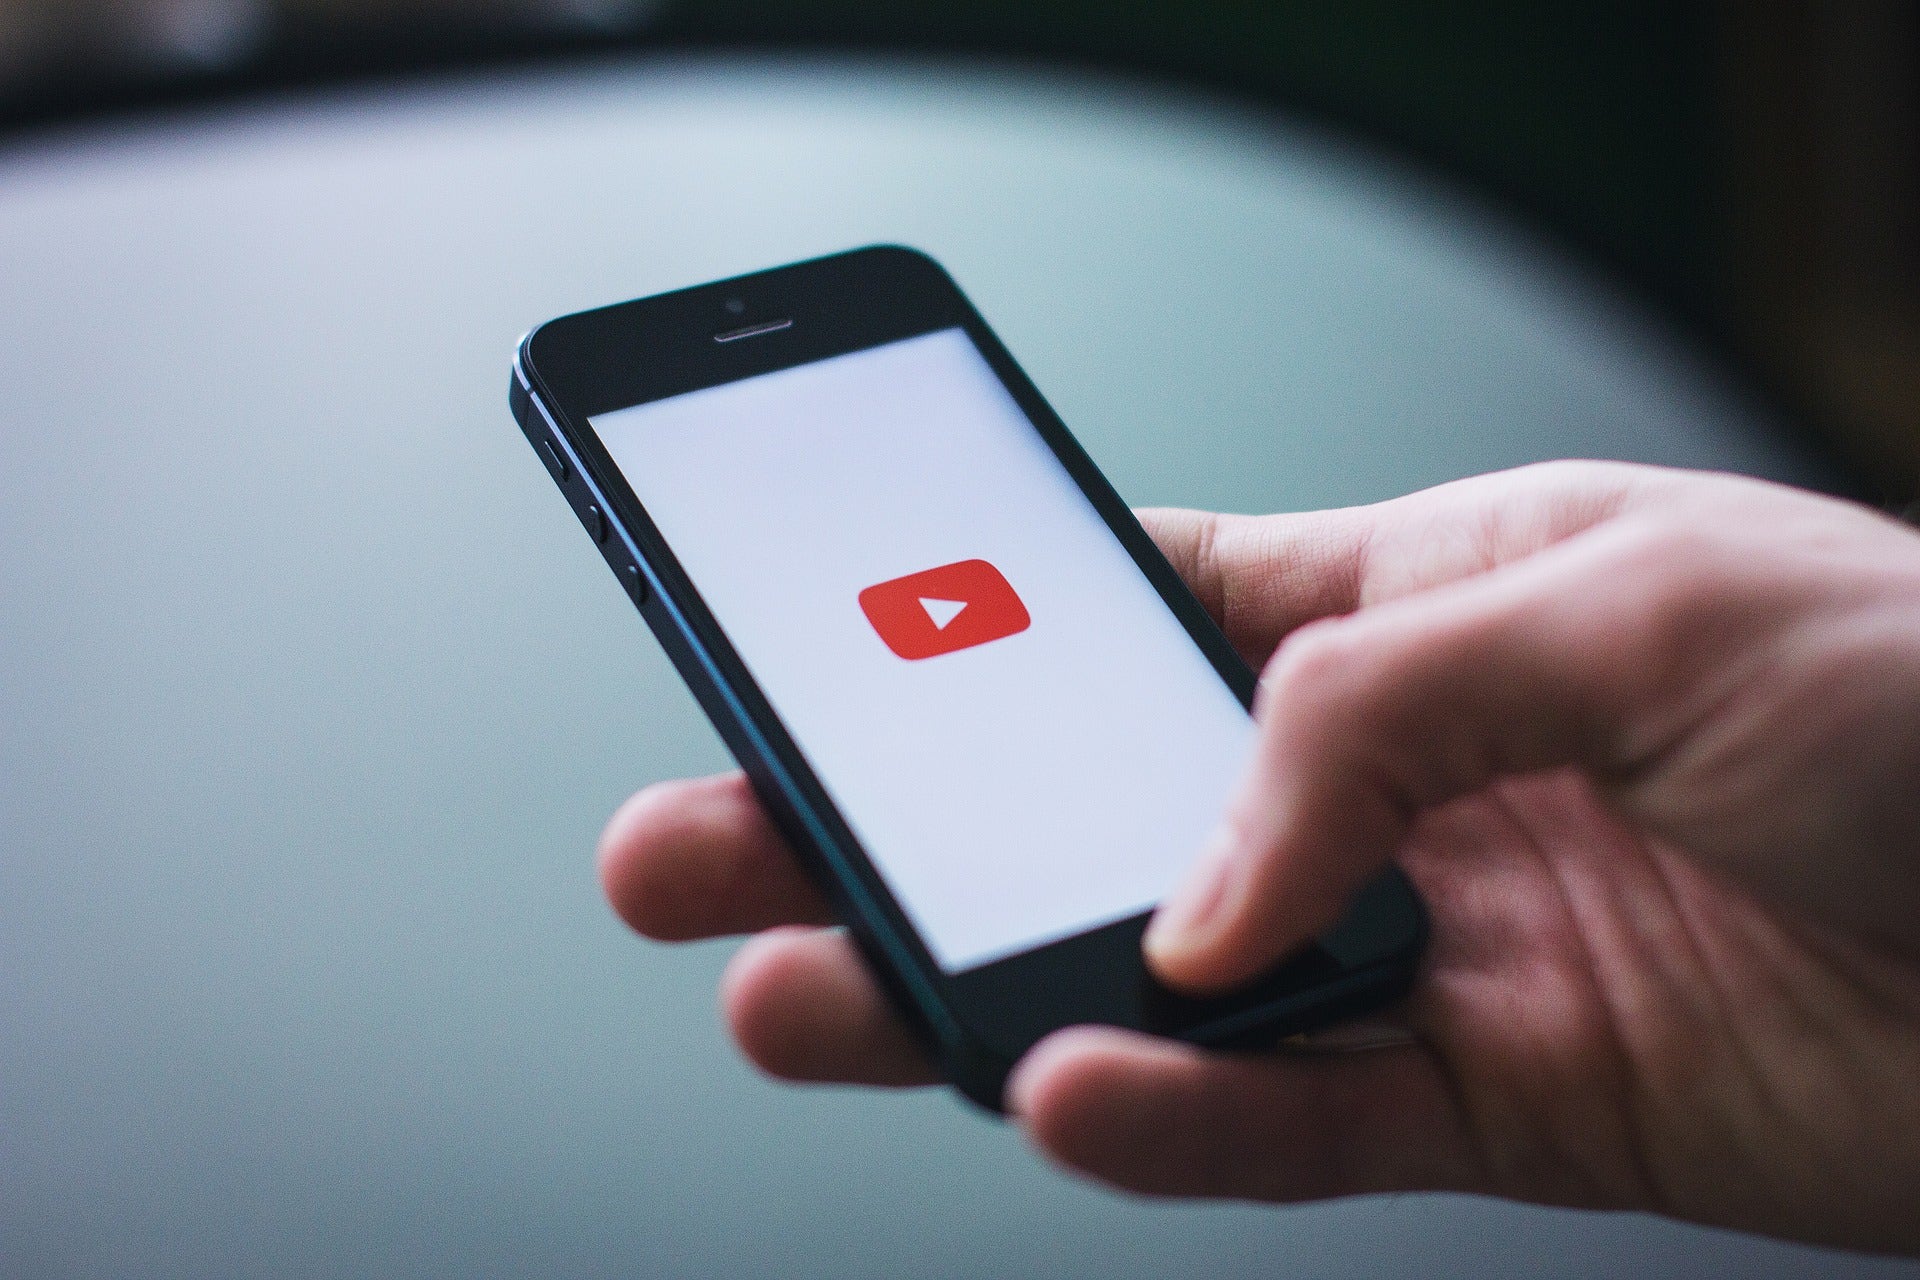 YouTube Touts $8B In Ad-Revenue For Q4, But Did It Beat Netflix? Here's The Latest